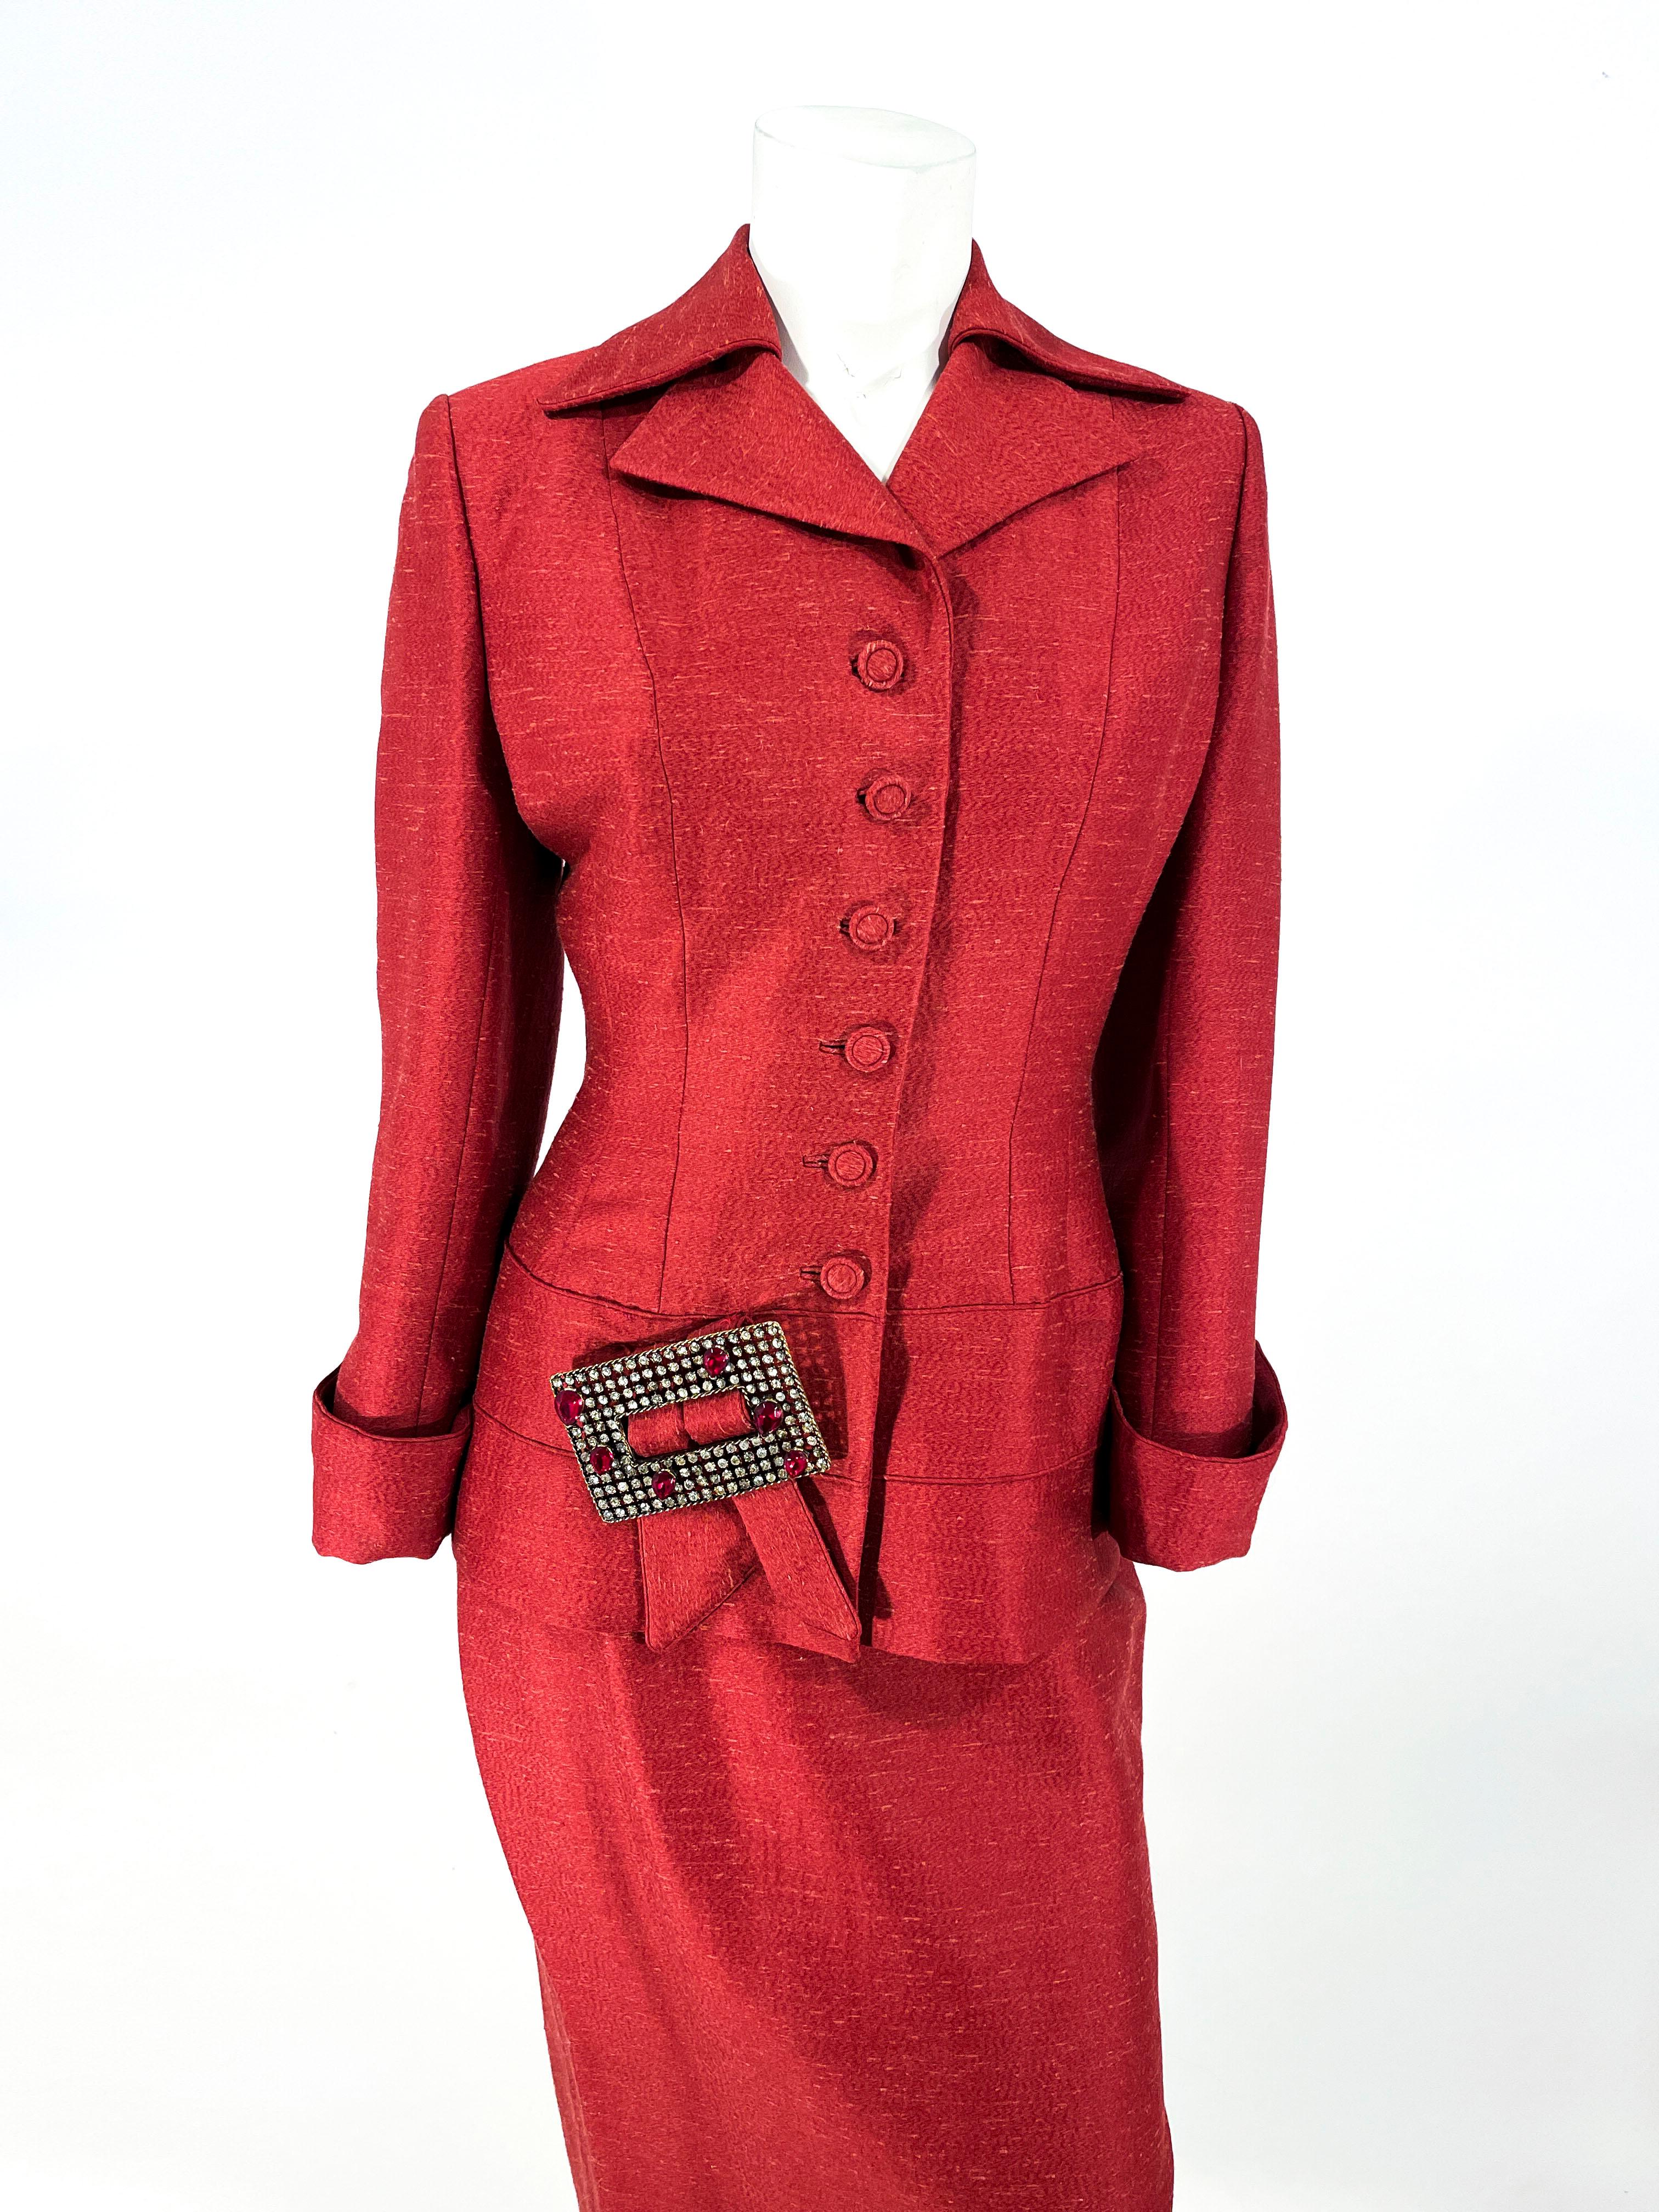 1950s Red Lilli Ann wool and silk blend jacket and skirt suit. The suit jacket features a sharp collar, notch lapel, designer covered buttons, in-set button holes, fitted and tailored wasp waist, and an enlarged clear and red rhinestone buckle